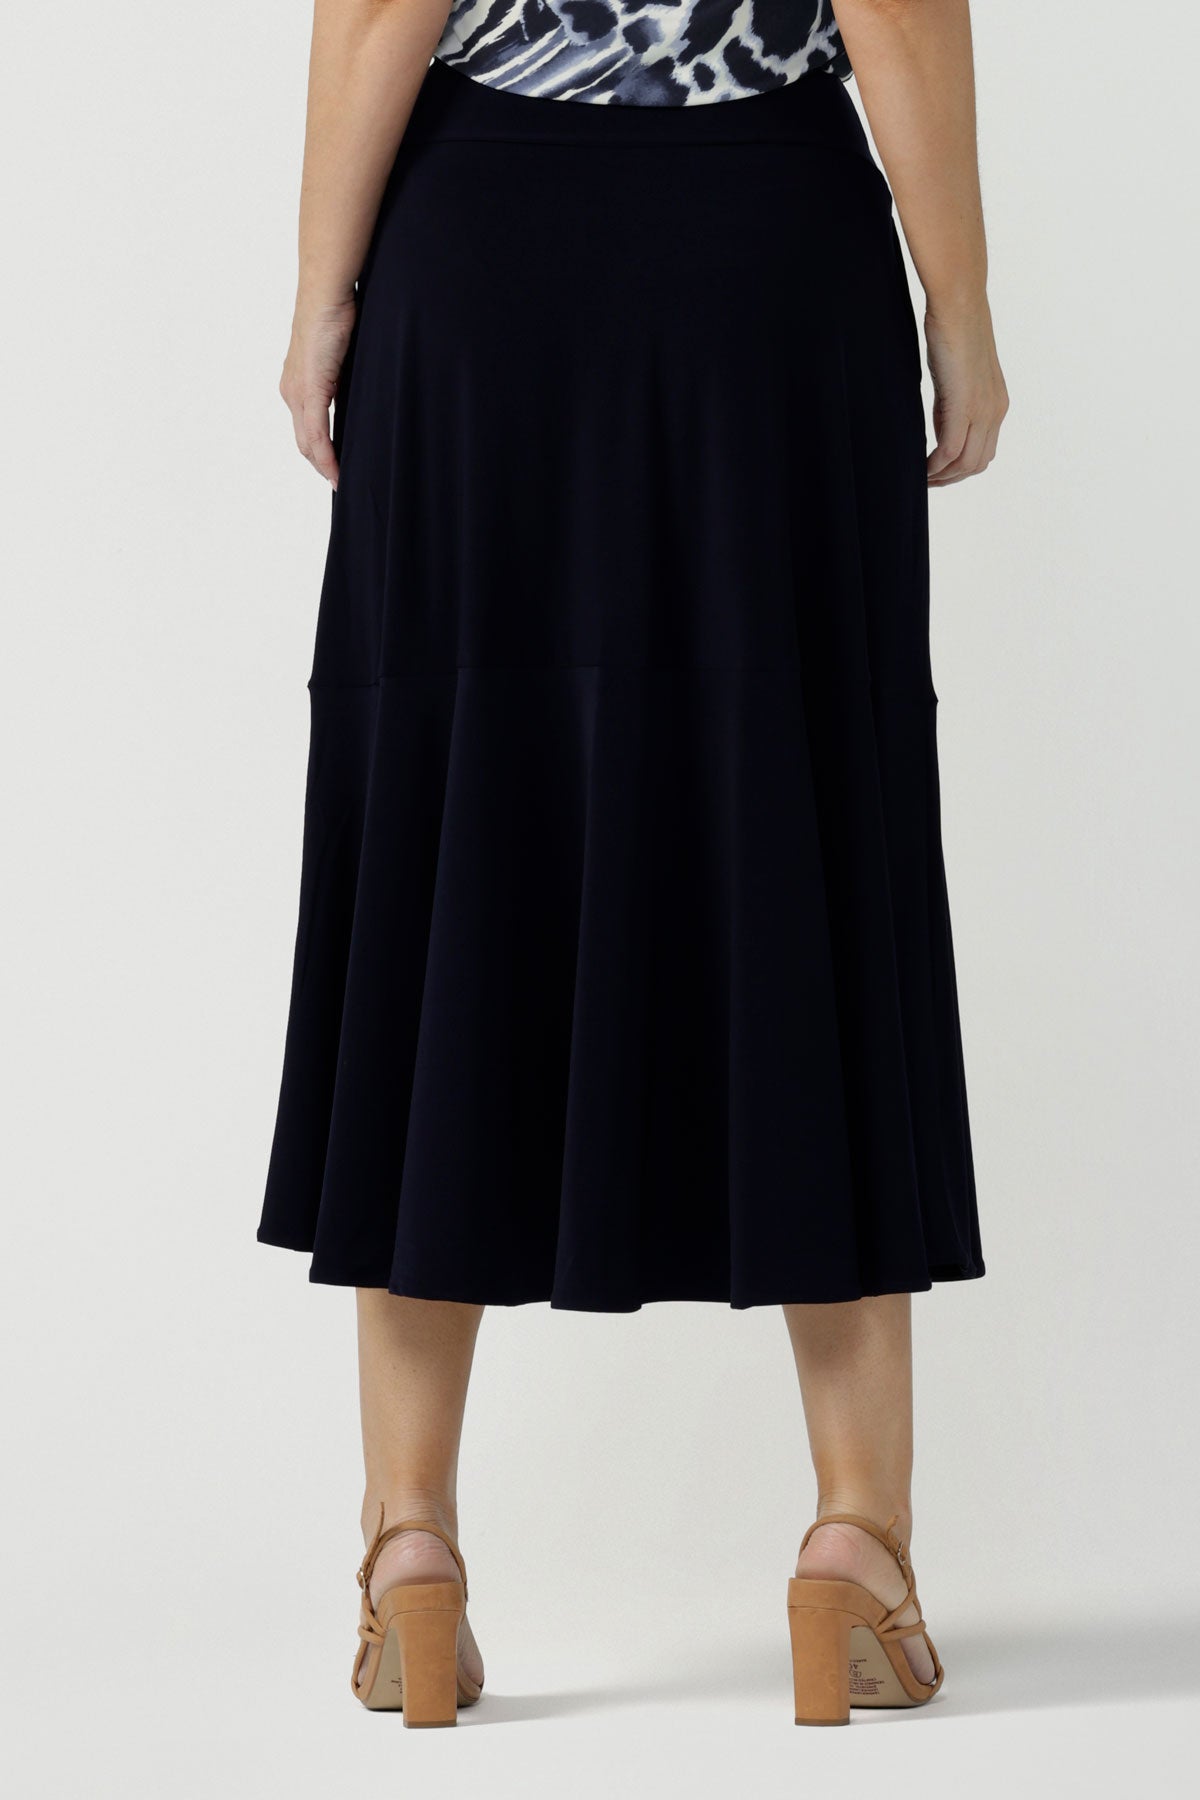 Back view of a woman wears a pull on, navy maxi skirt with ruffle hemline with a short sleeve flutter sleeve blue printed top. This black maxi skirt is a good workwear skirt or smart-casual skirt. Made in Australia in petite plus sizes 8-24.